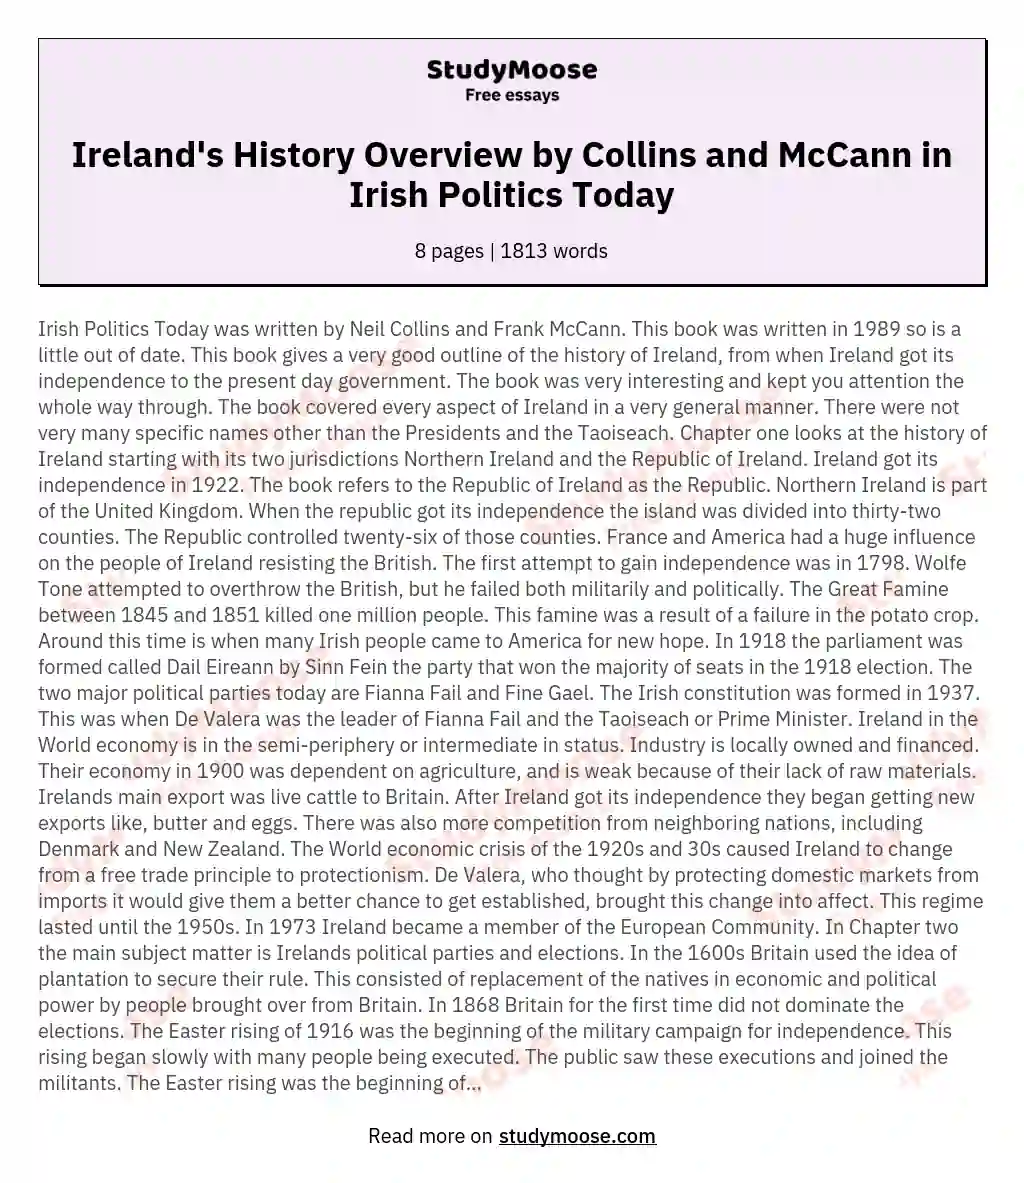 Ireland's History Overview by Collins and McCann in Irish Politics Today essay